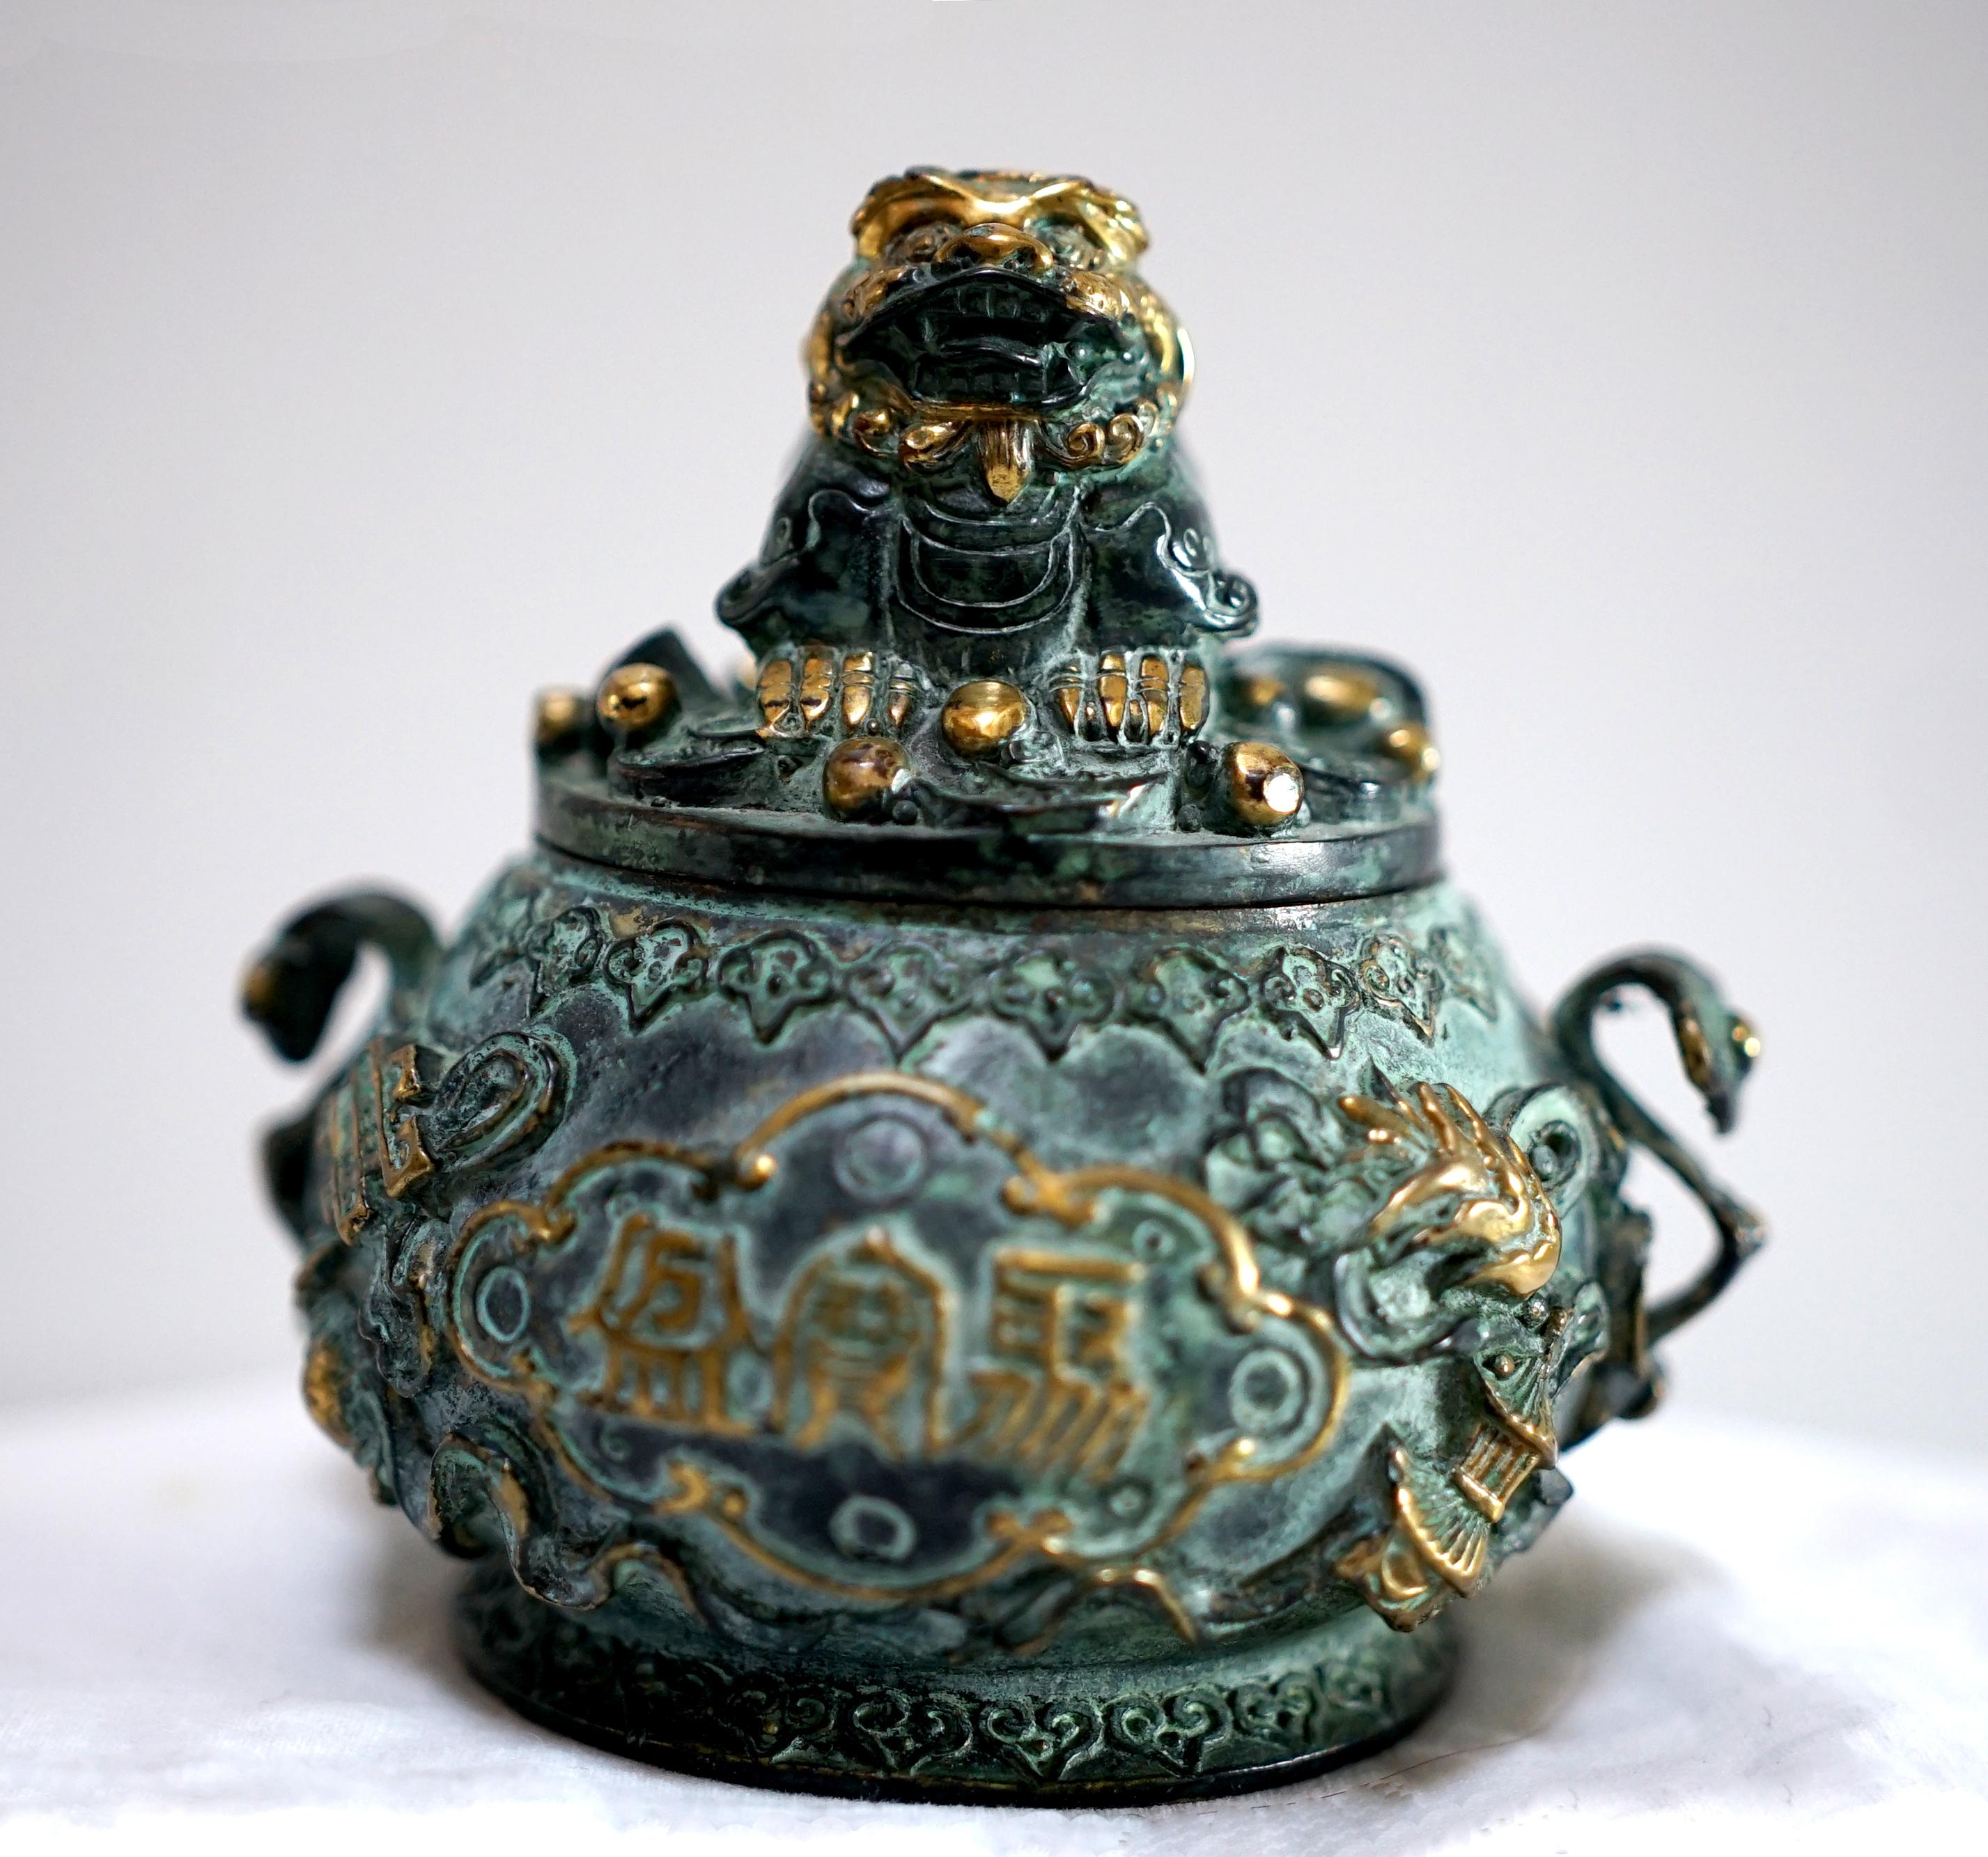 Bronze and gilt detailing combine to make this Chinese censer a beautiful decorative cast bronze accent. The bowl and cover are cast with various objects, small and bright like a fish, with other lucky auspicious objects and characters that connote